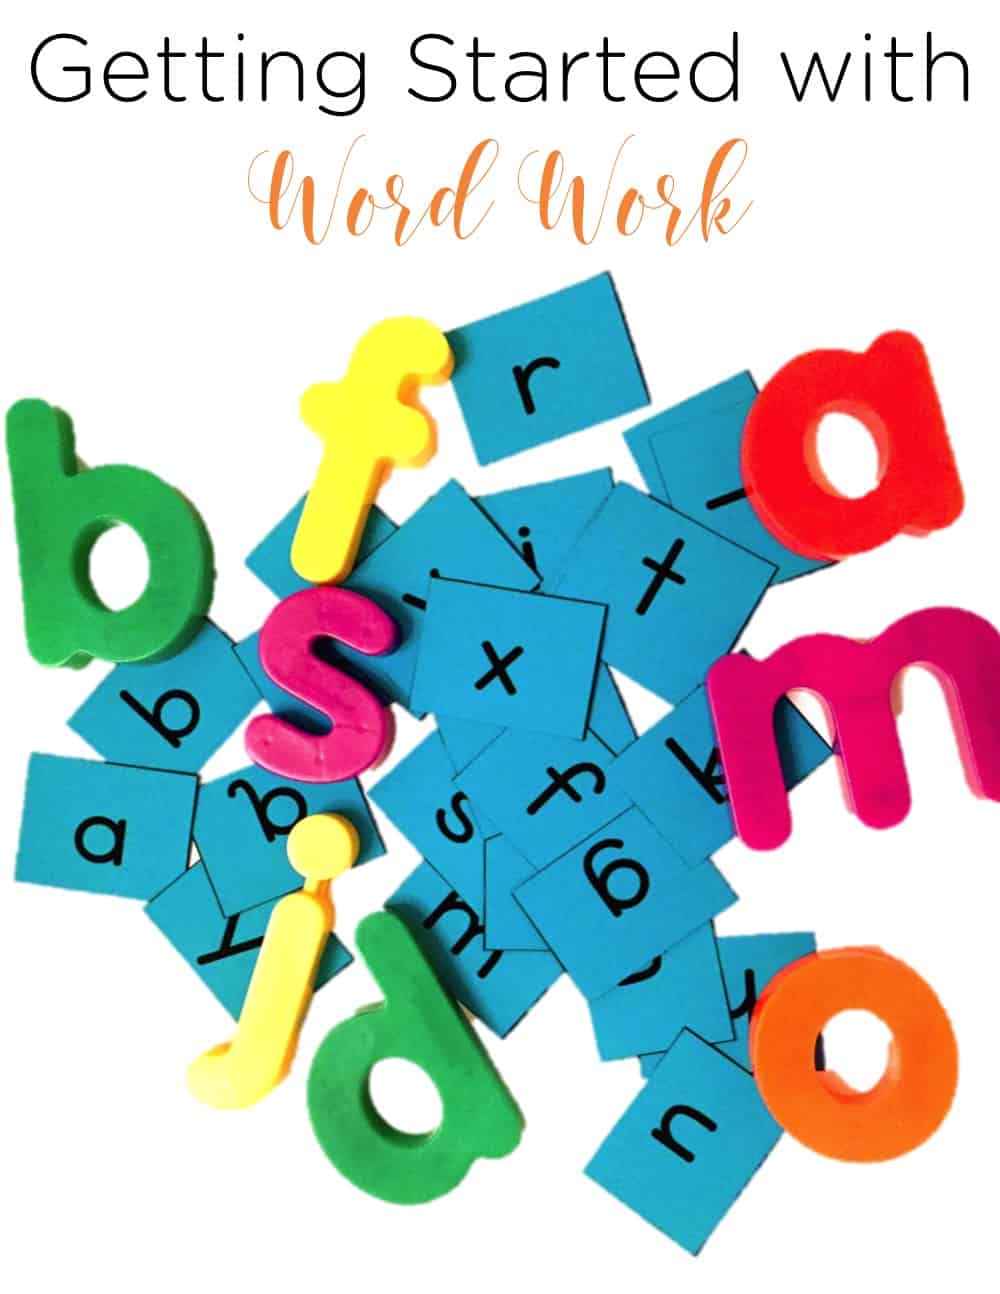 Word Work is an important part of the balanced literacy approach to reading. See how this teacher does word study in her kindergarten and first grade classroom, see her favorite resources, and grab the FREEBIE! #literacy #homeschool #language arts #wordwork